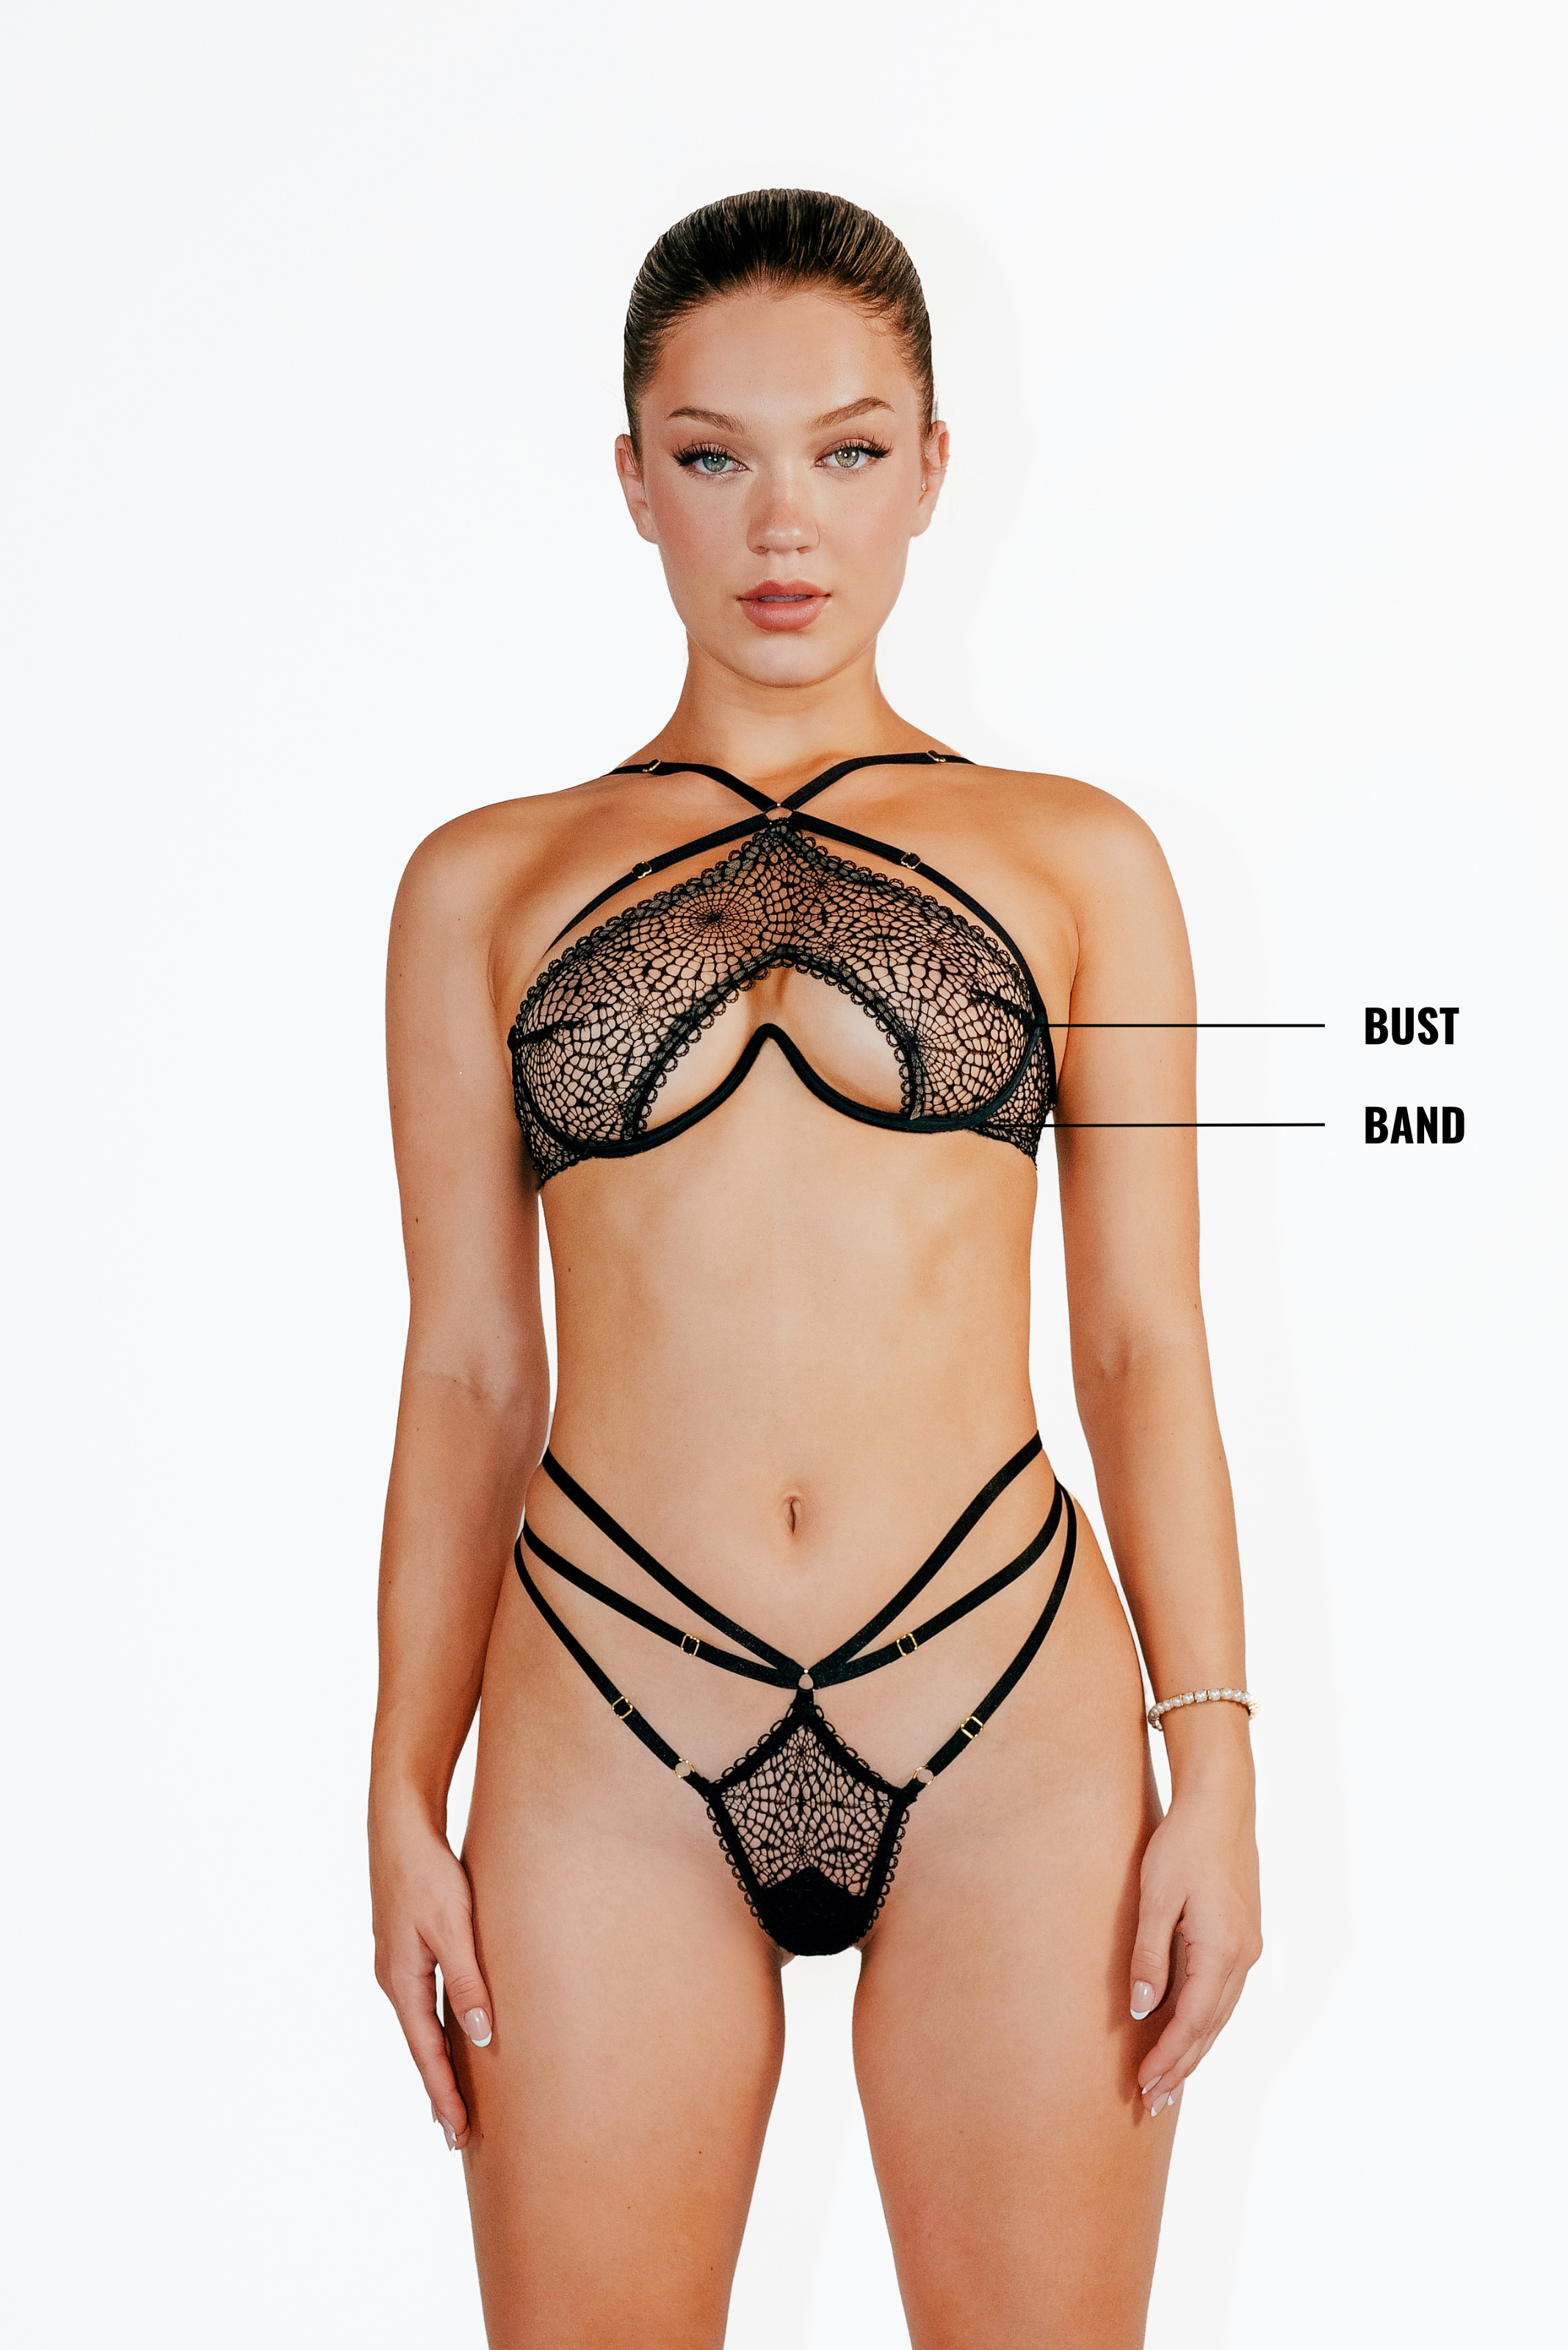 FIND YOUR SIZE UNDER BREAST